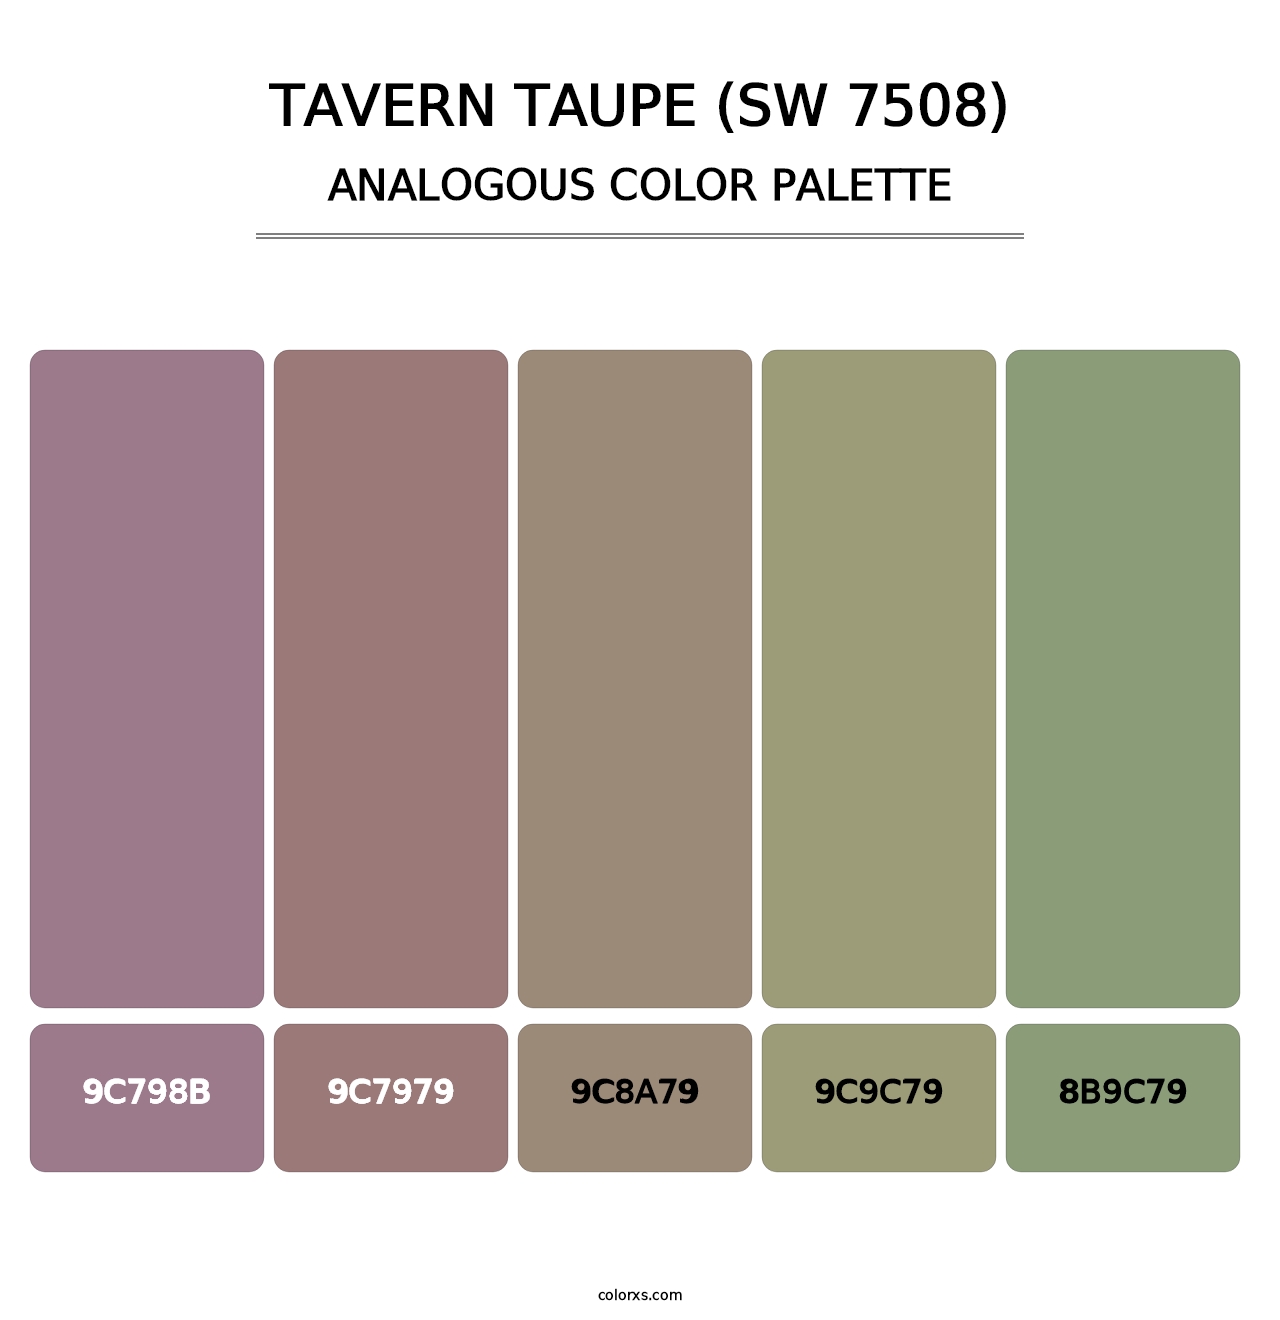 Tavern Taupe (SW 7508) - Analogous Color Palette